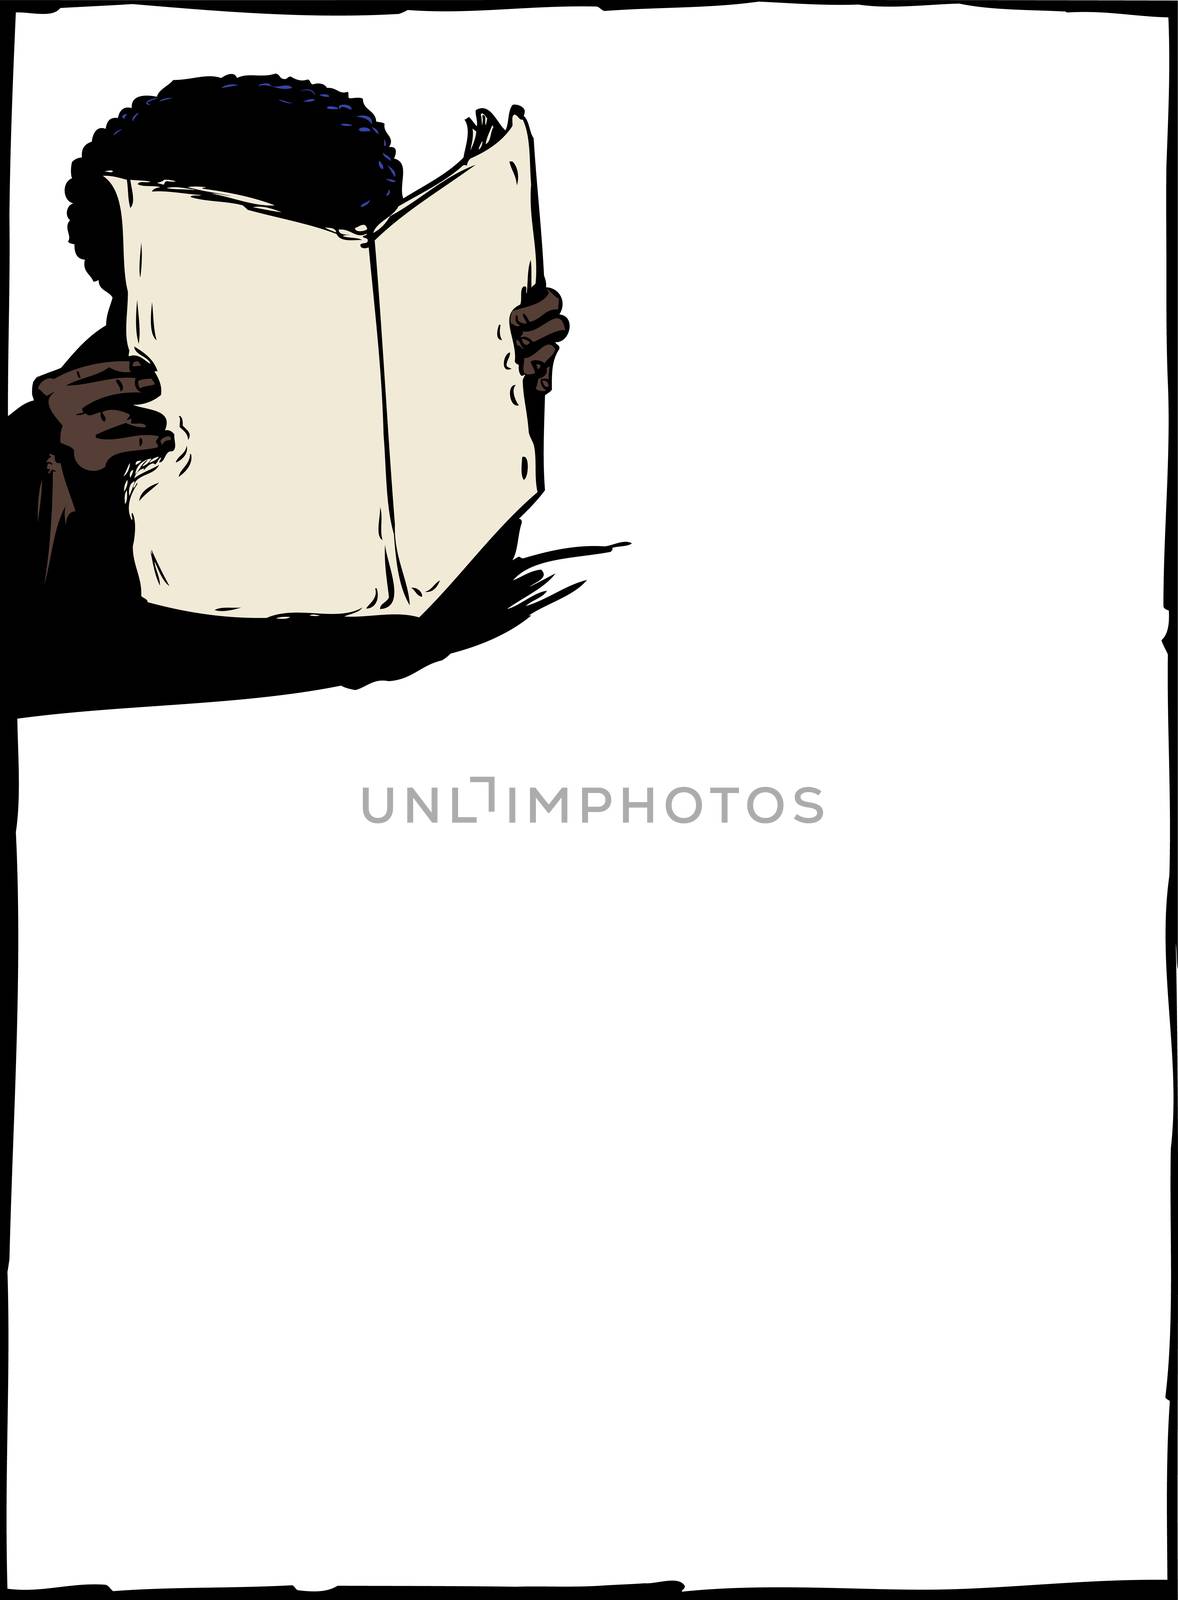 Obscured front view of Black person reading a blank newspaper